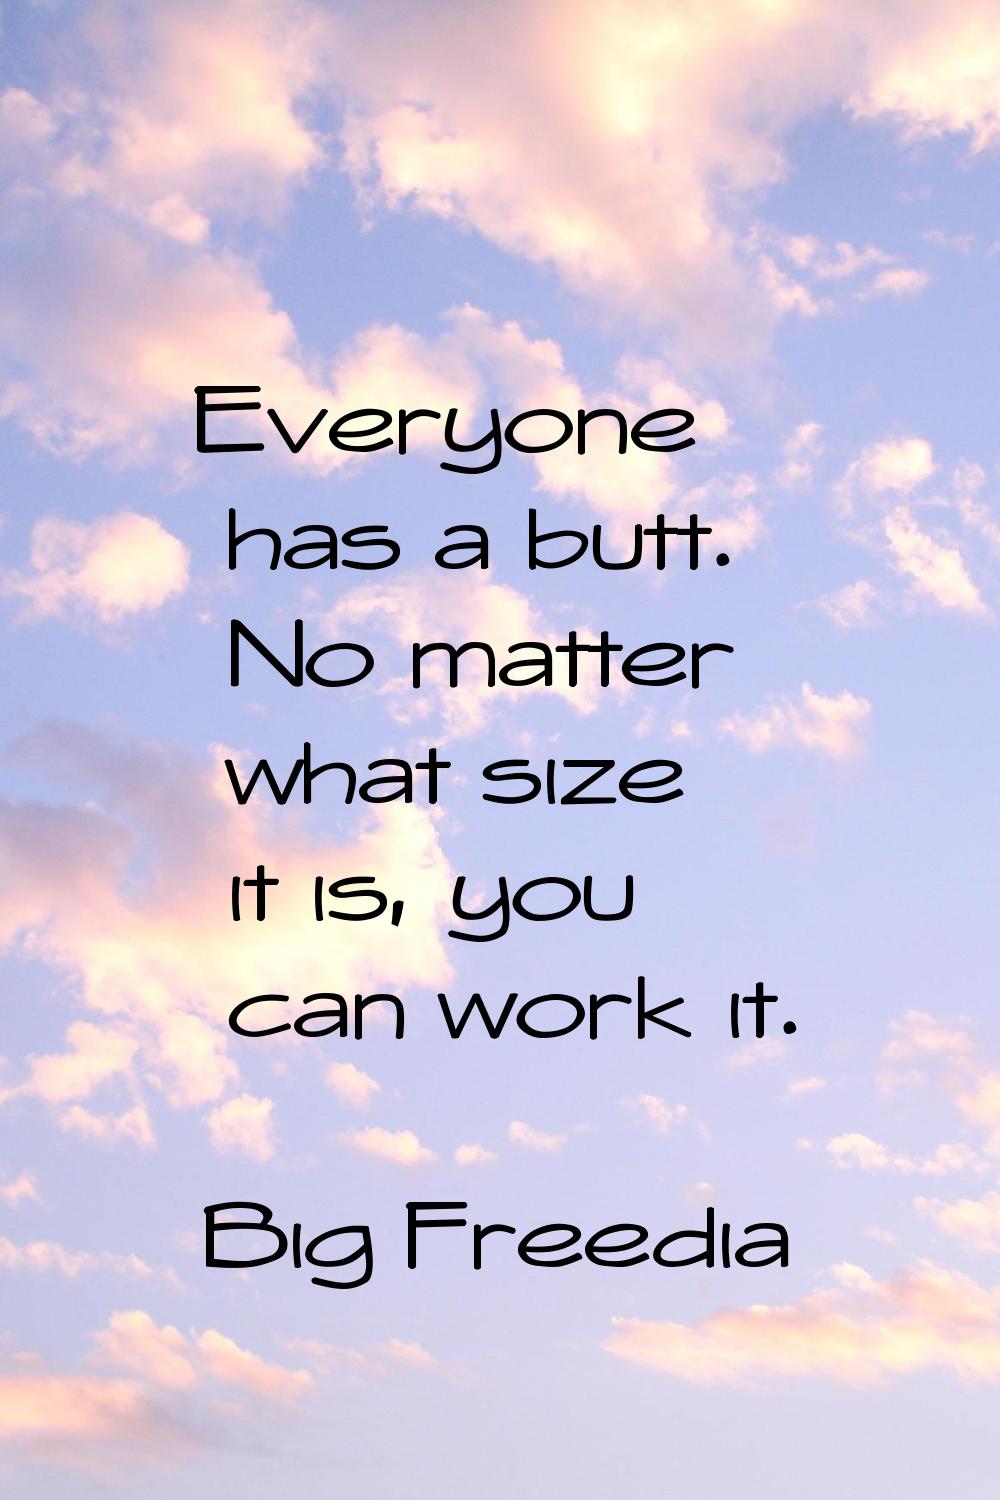 Everyone has a butt. No matter what size it is, you can work it.